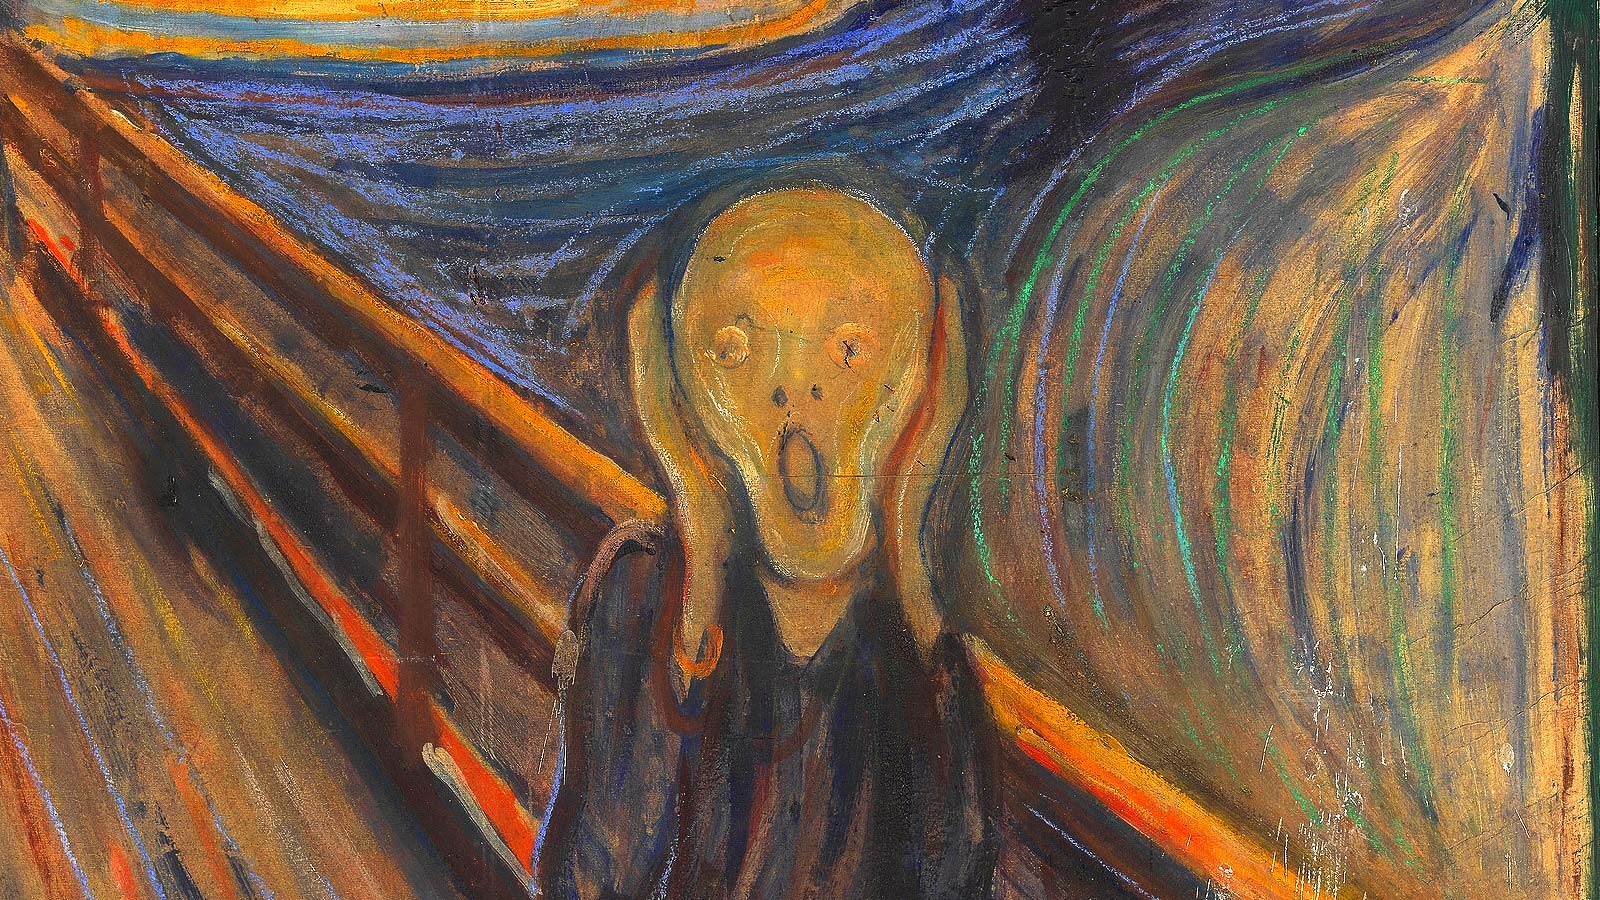 Quiz Answers Beginning With E The Scream painting by Edvard Munch